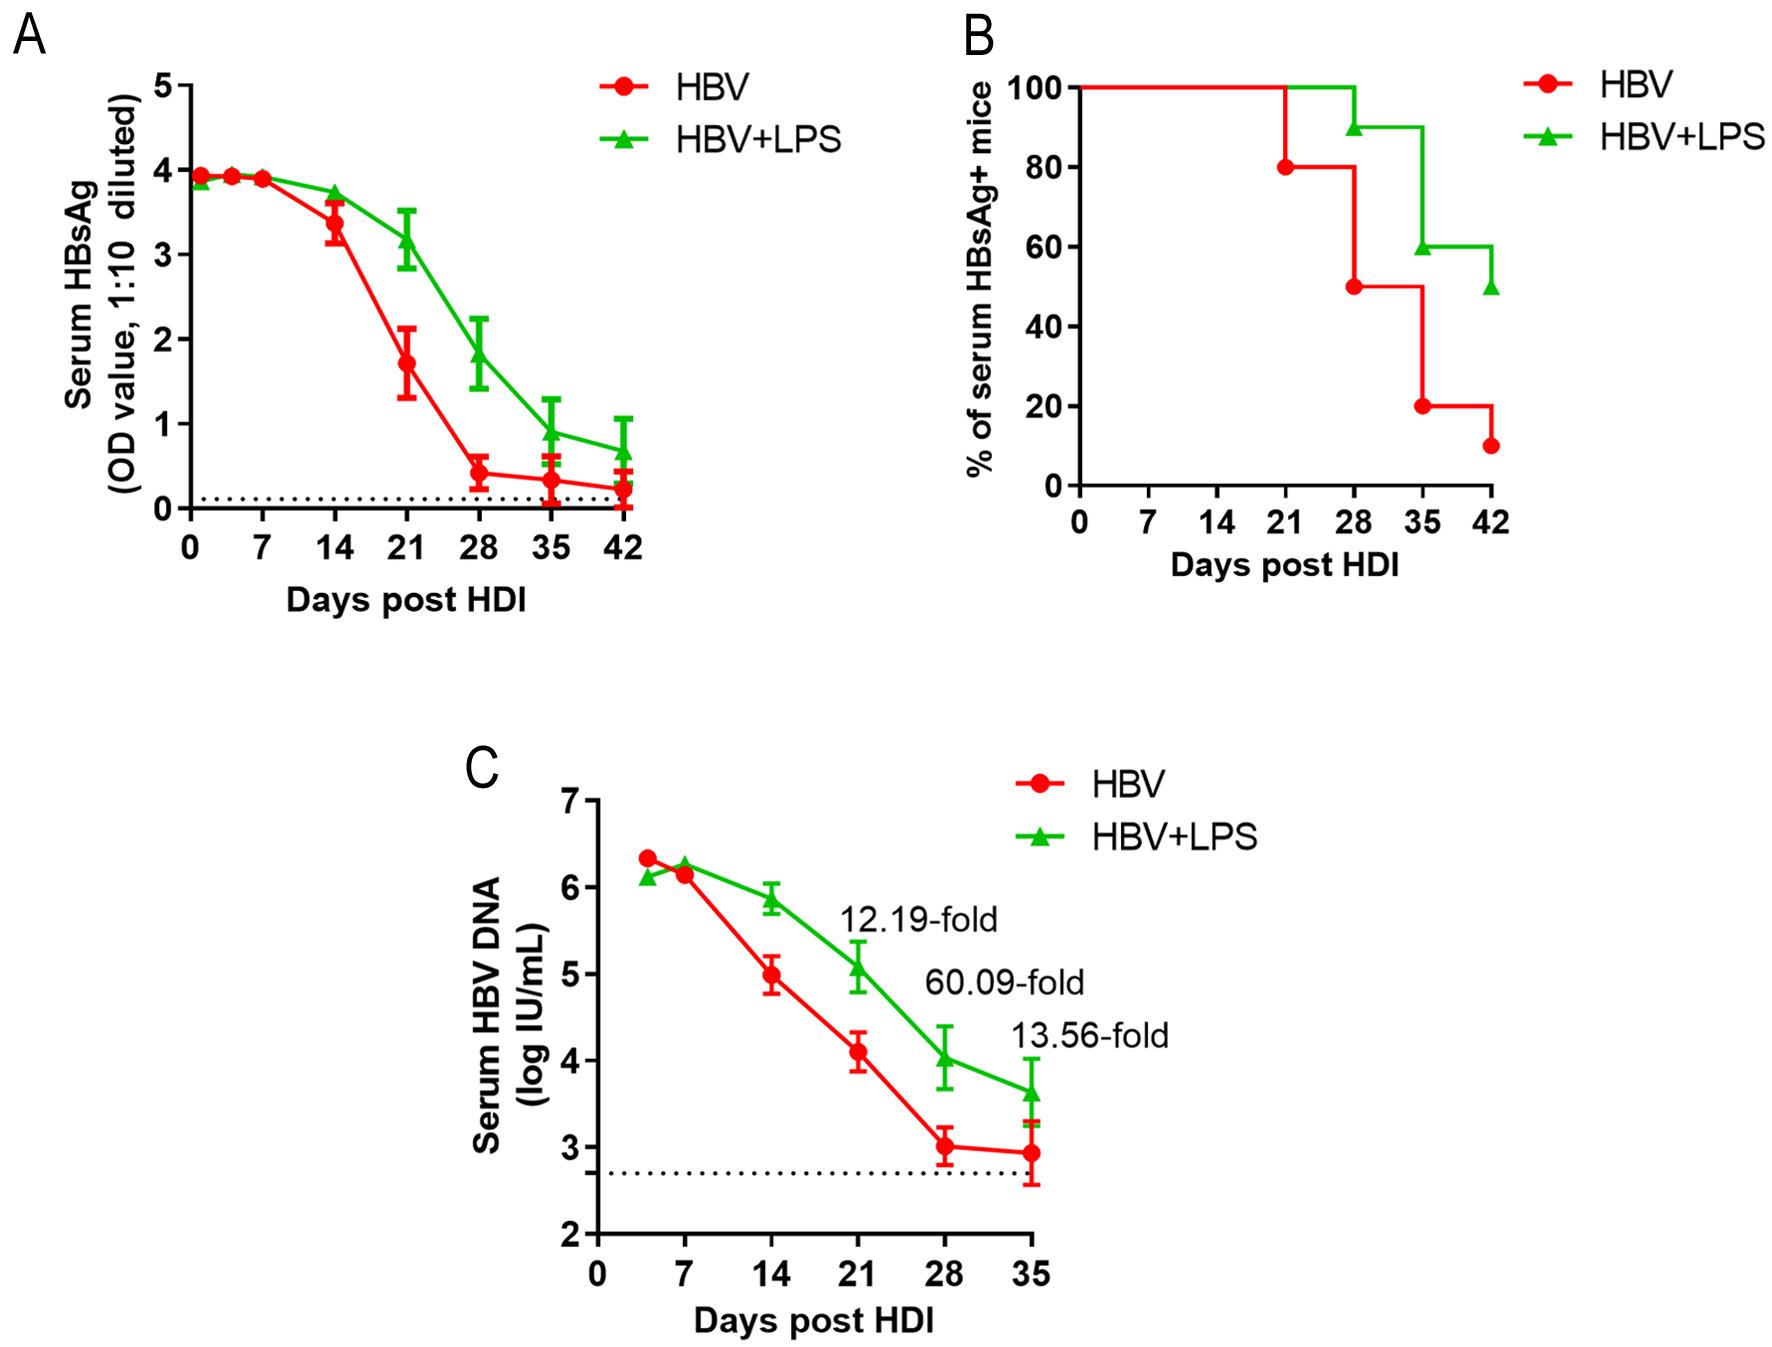 LPS stimulation results in delayed HBV clearance in HBV-replicating mice.